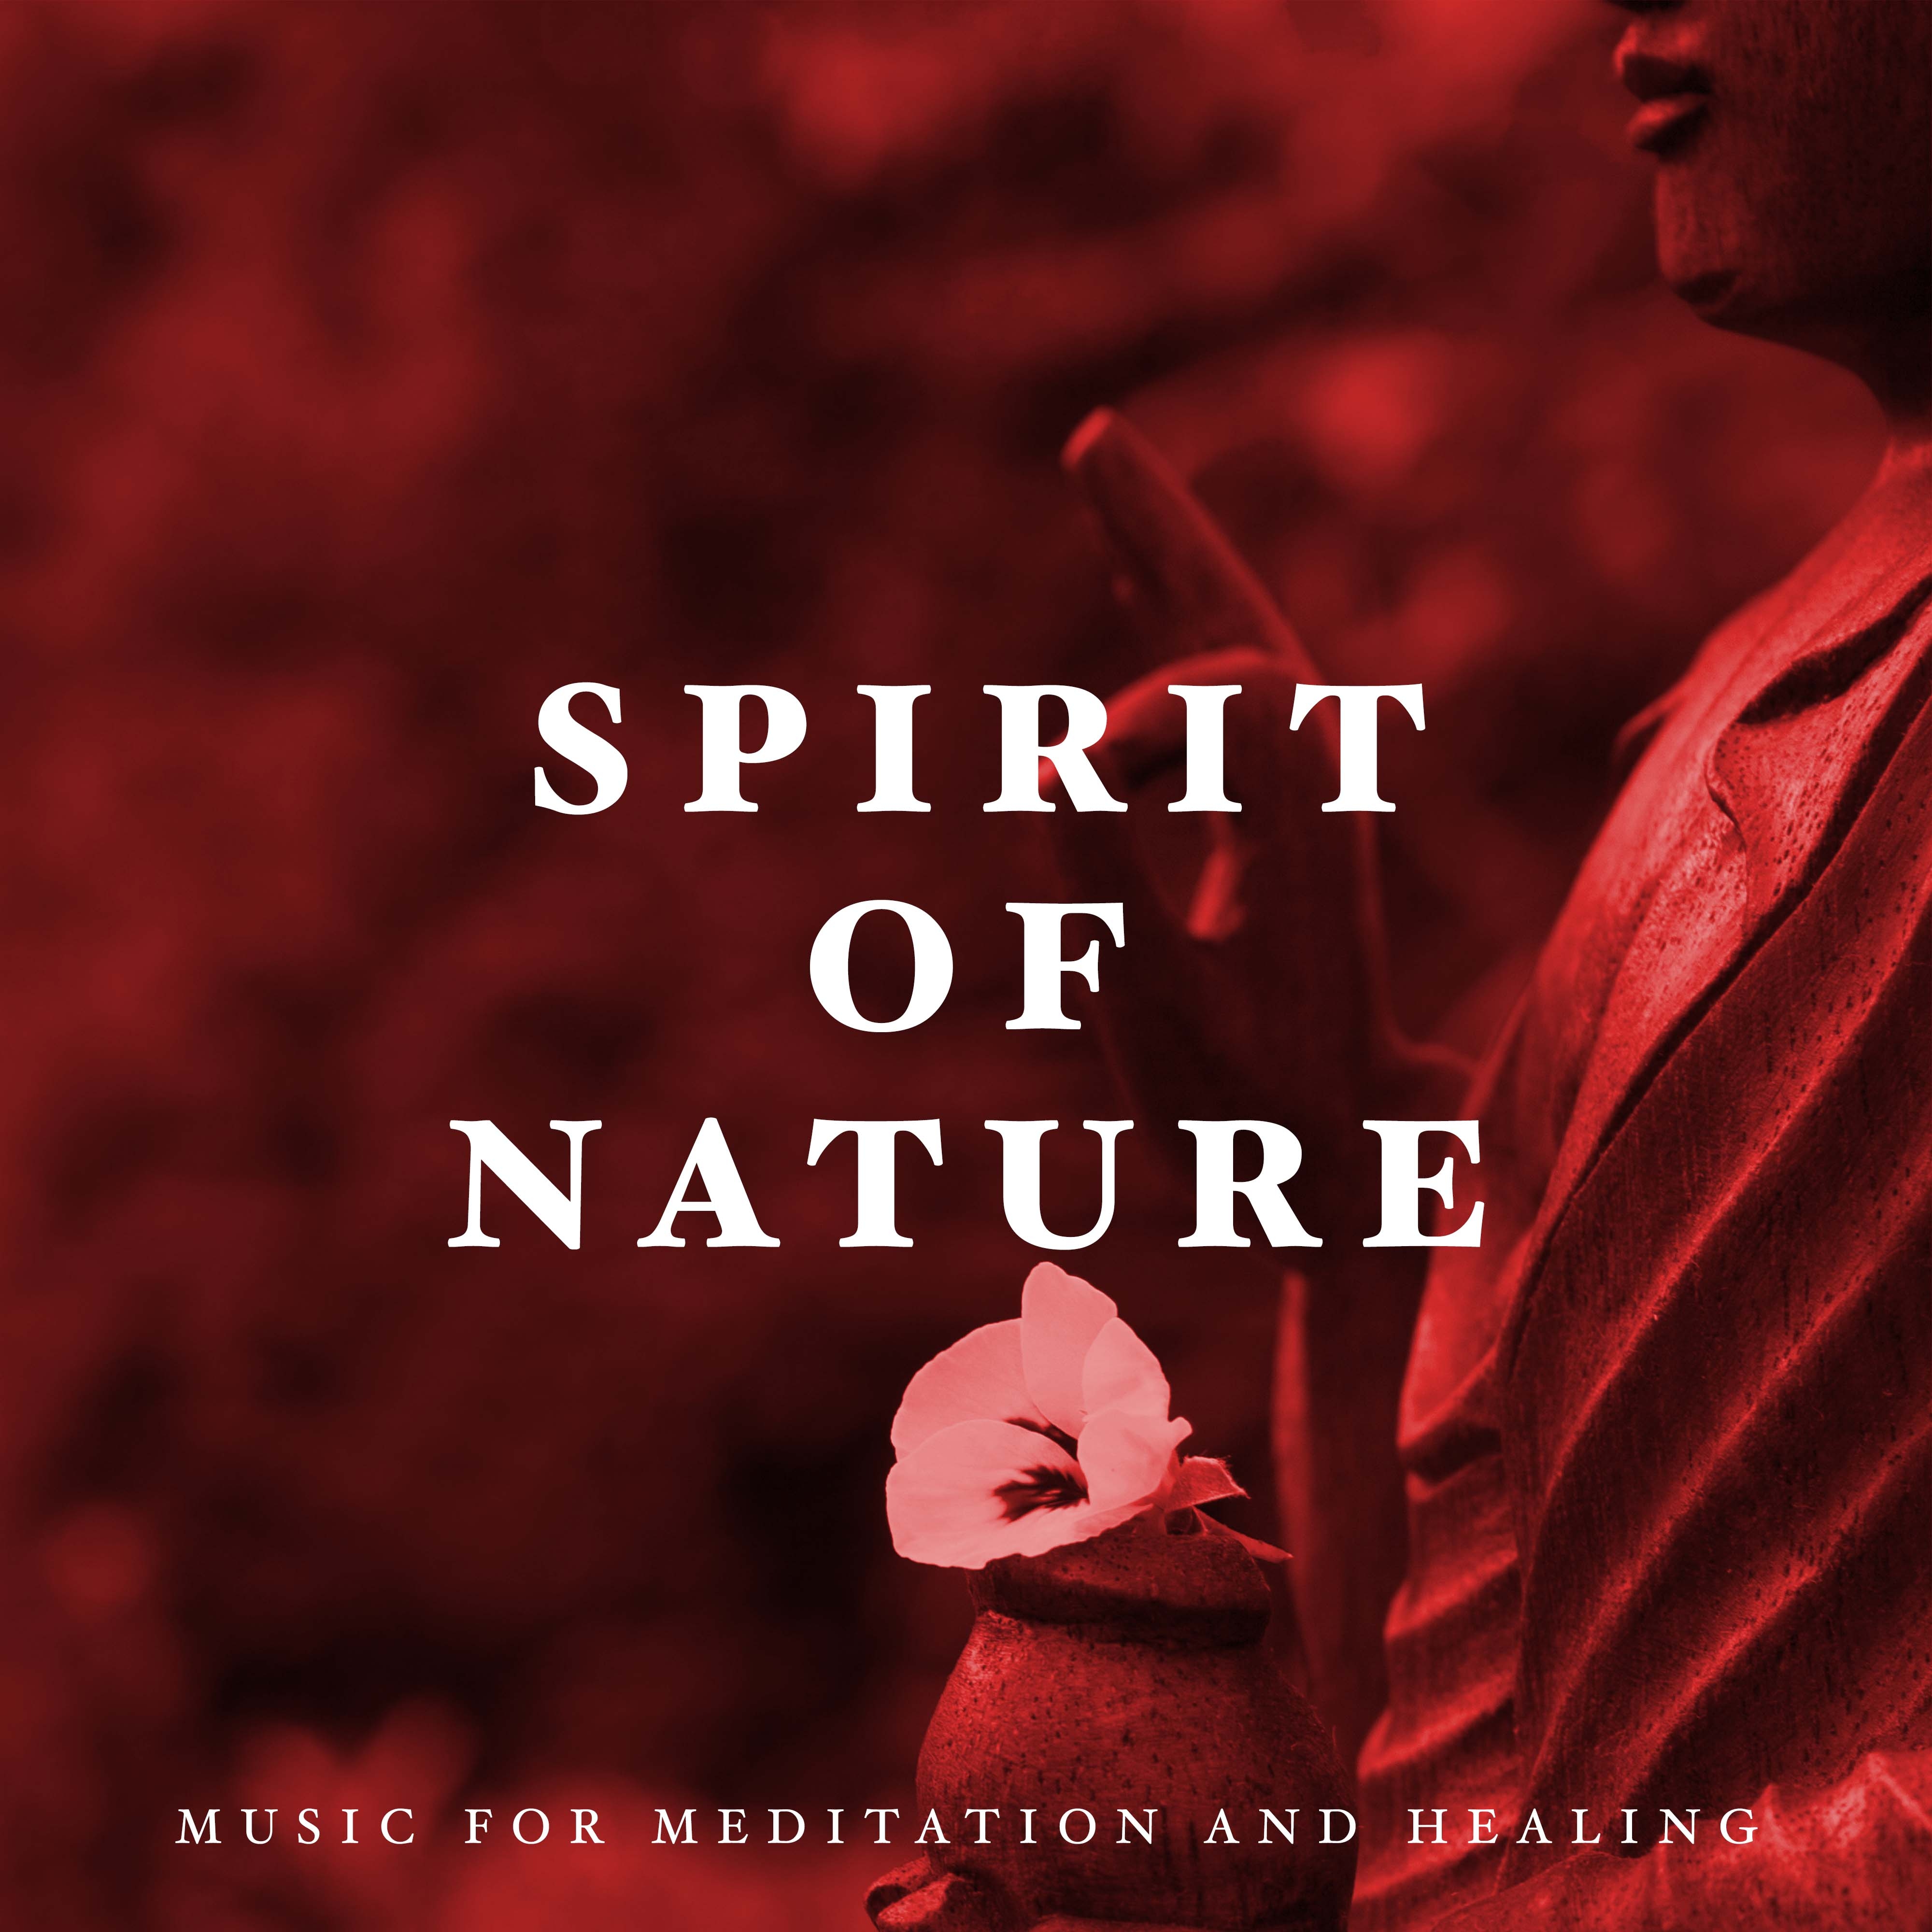 Spirit of Nature - Ideal Music for Meditation and Healing